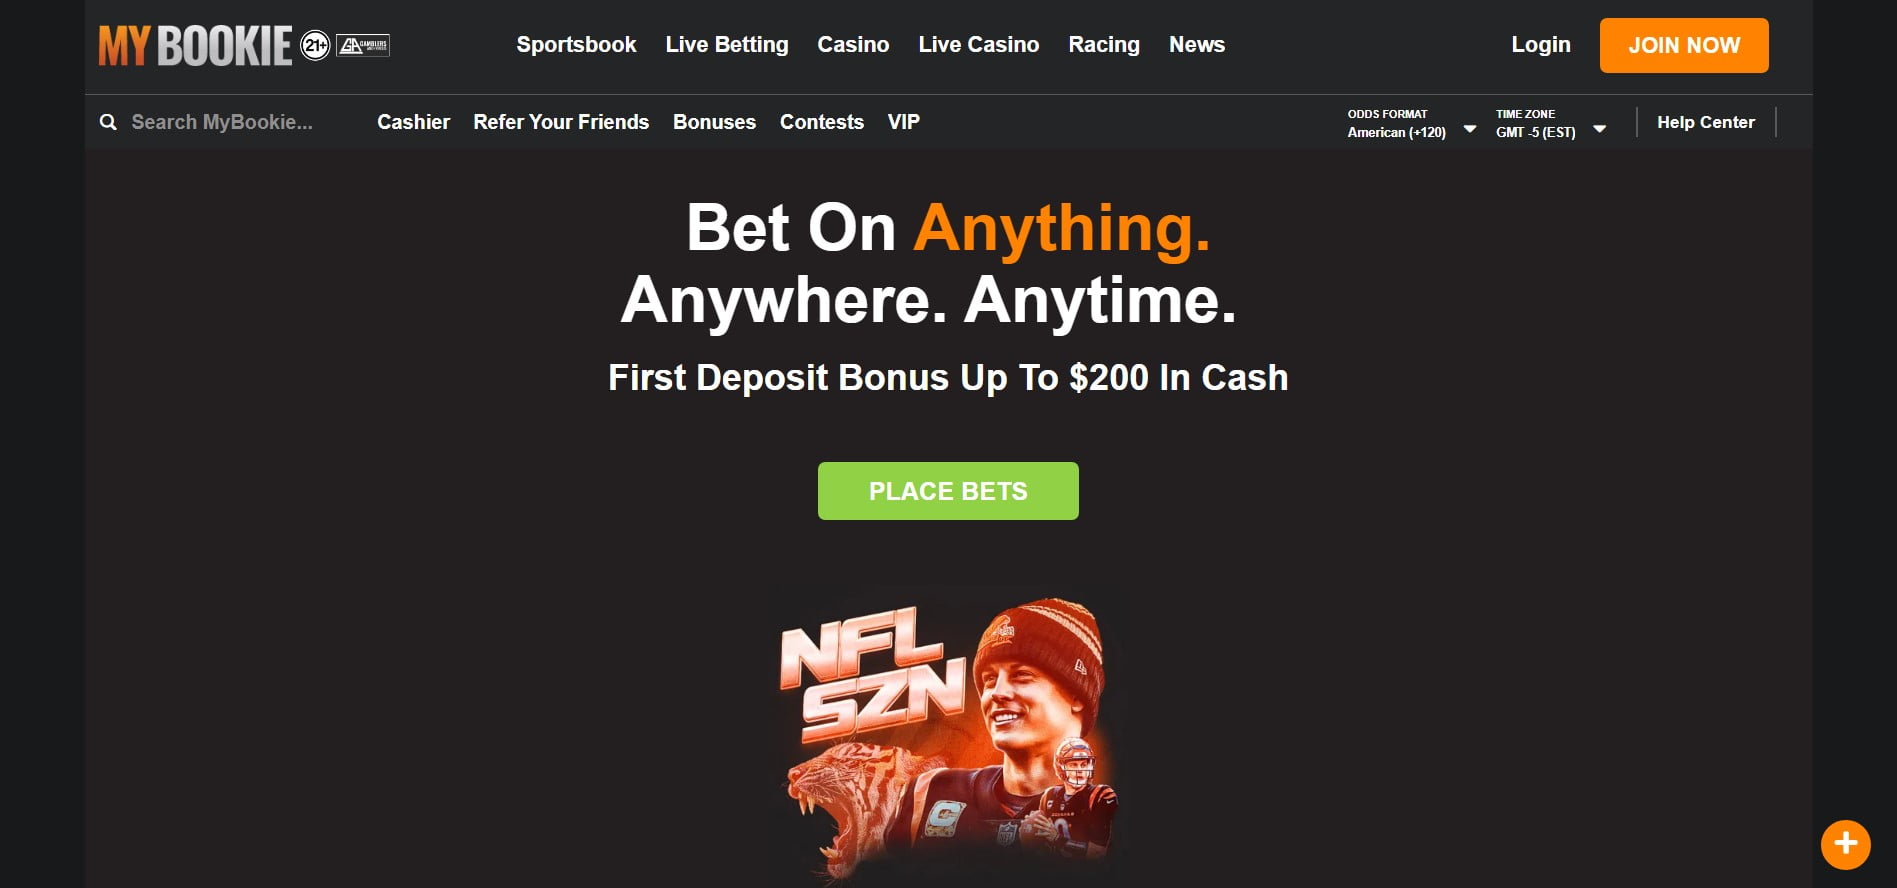 MyBookie Homepage DC sports betting sites